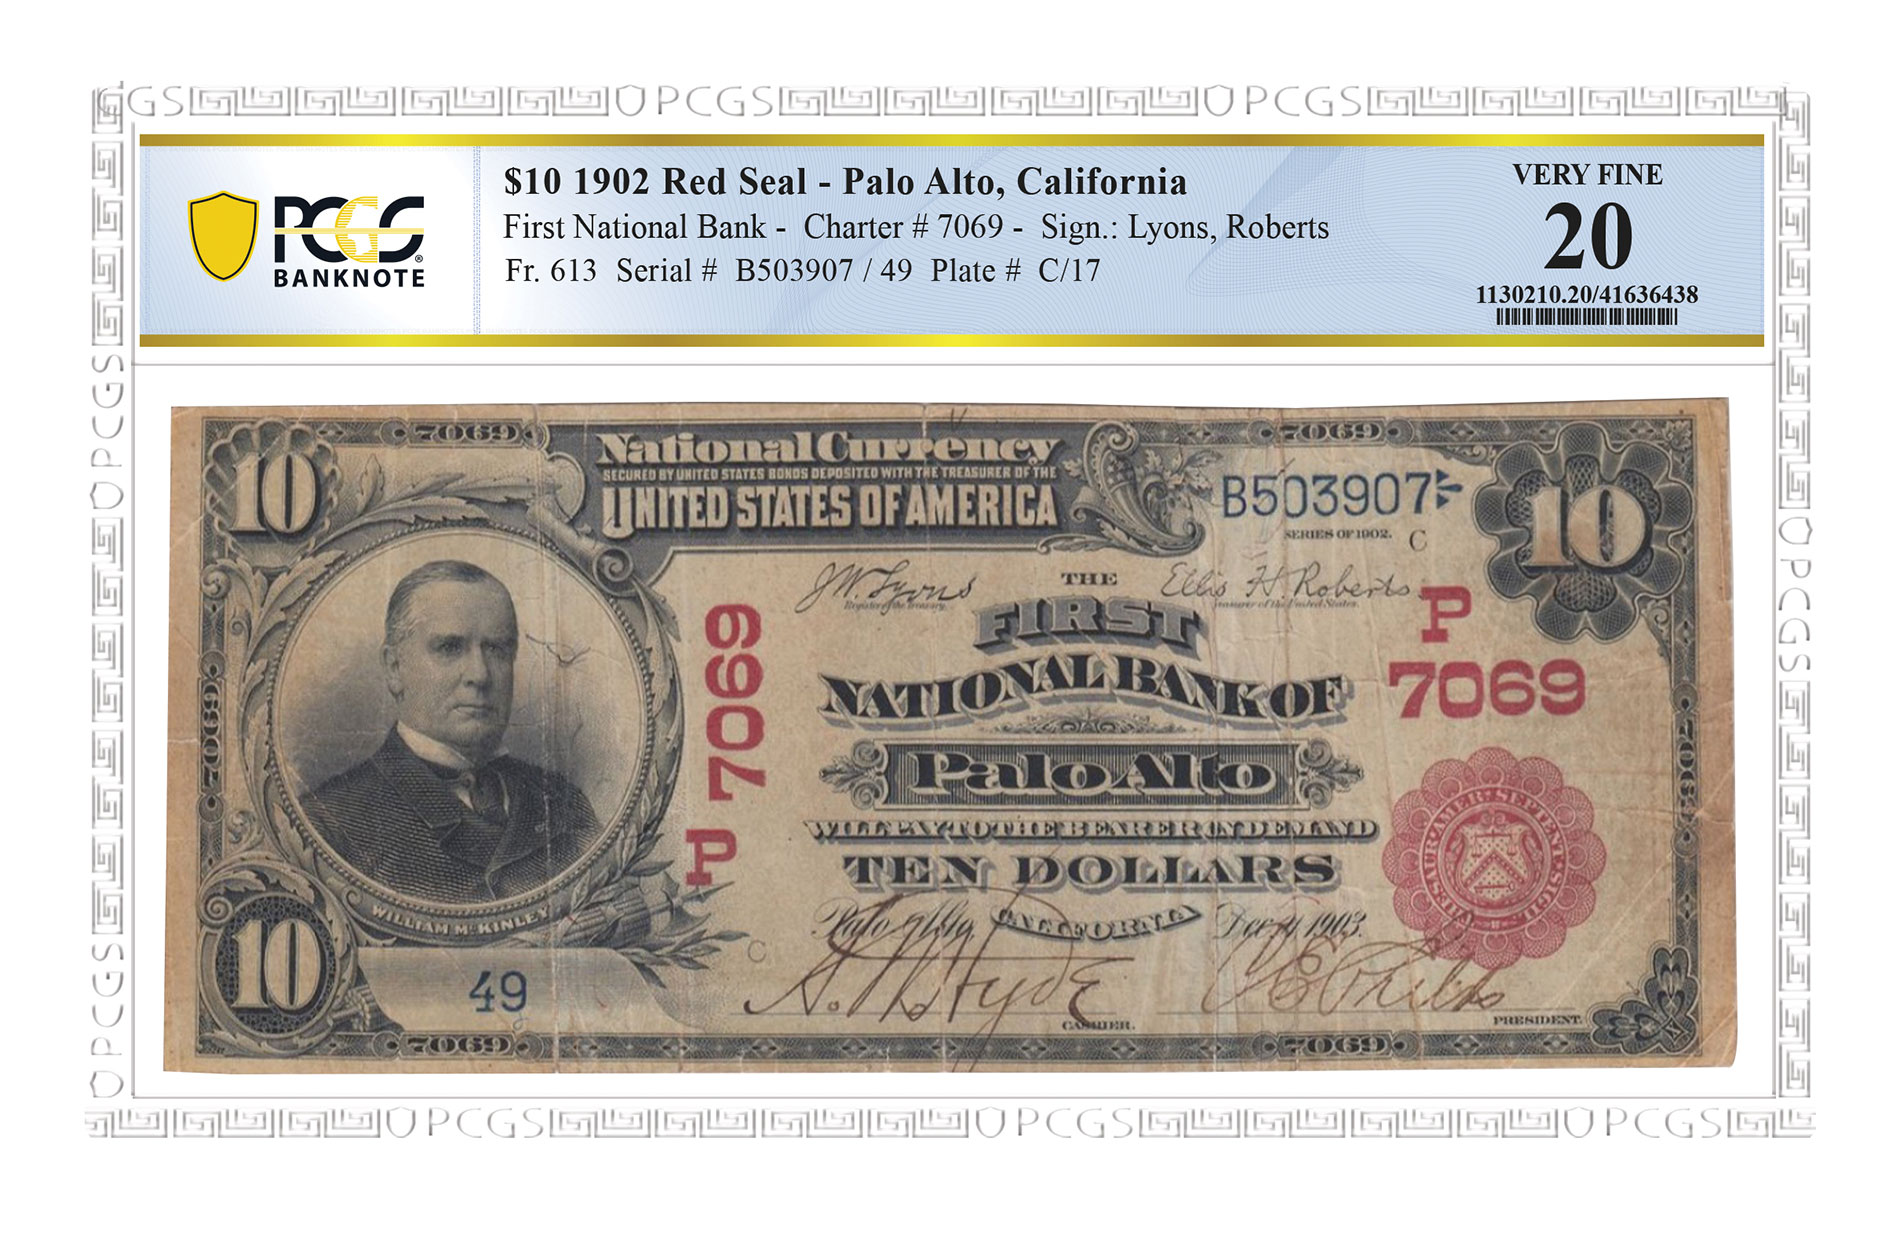 1902 $10 Red Seal – Palo Alto, California, First National Bank Charter #7069, PCGS VF20. Image courtesy PCGS.